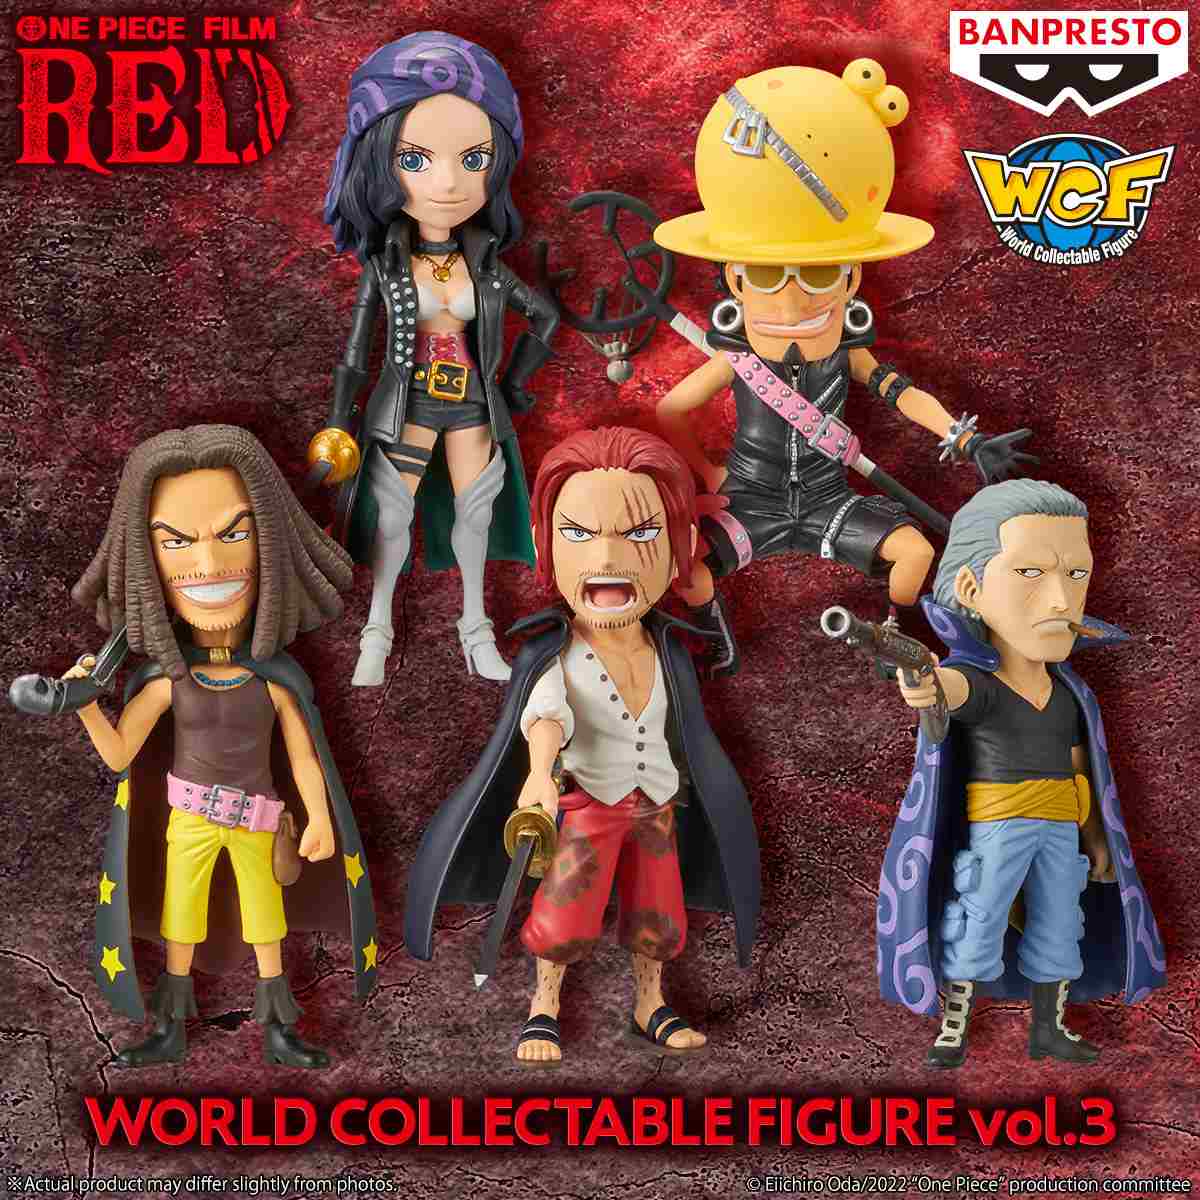 ONE PIECE FILM RED WORLD COLLECTABLE FIGUREvol.3 SPECIAL COMPLETE SET